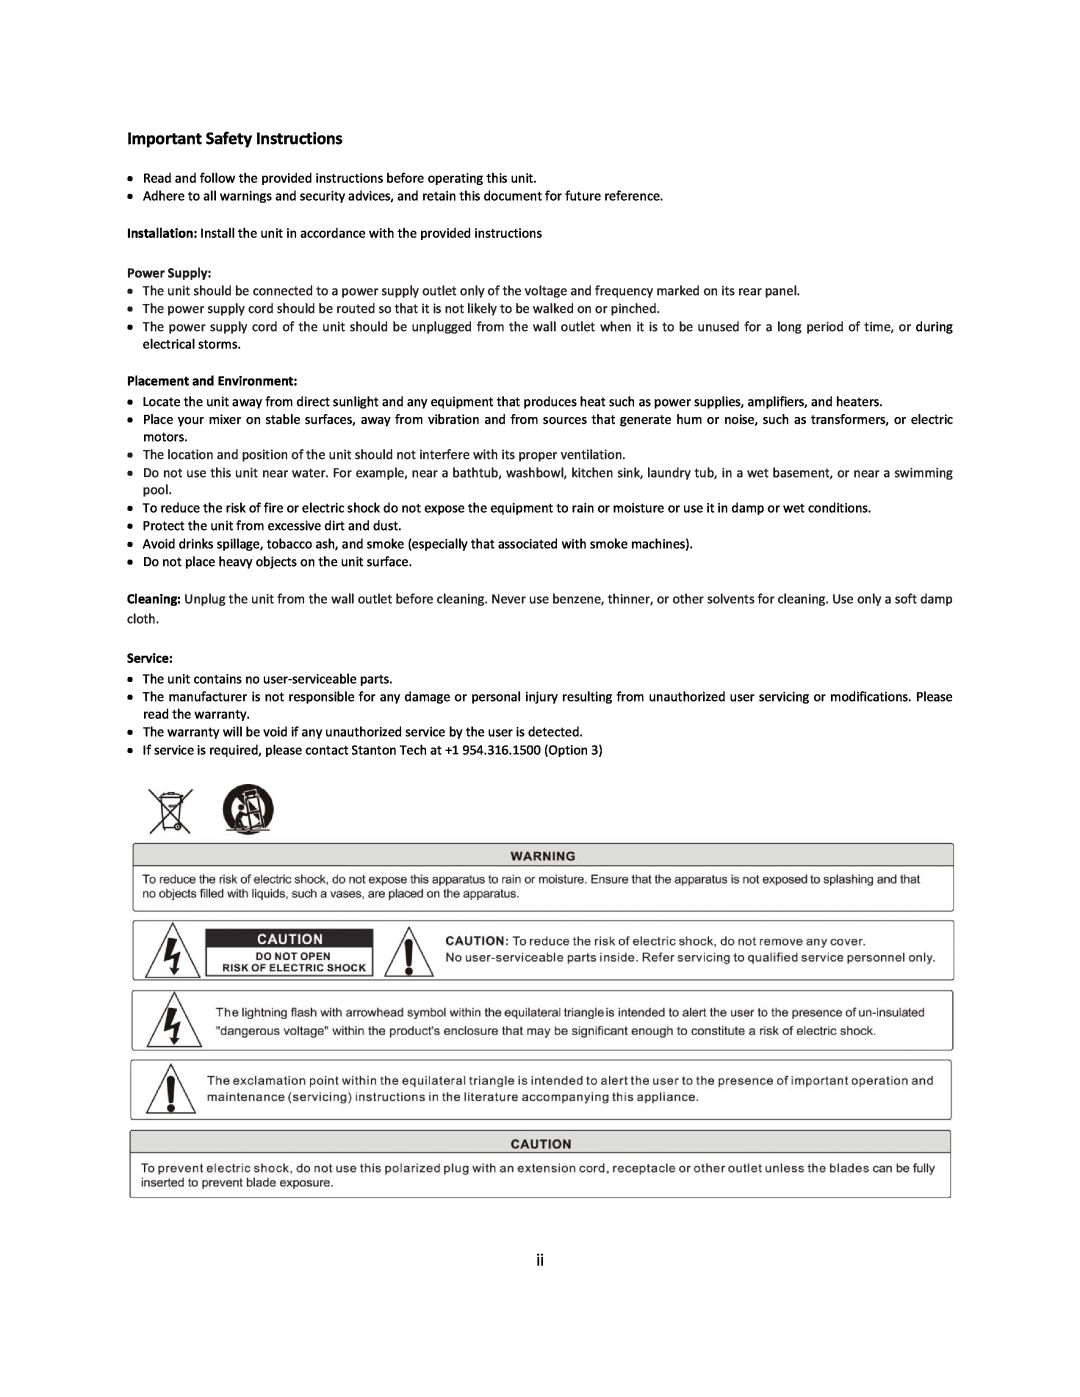 Stanton SCS.1d manual Important Safety Instructions, Power Supply, Placement and Environment, Service 